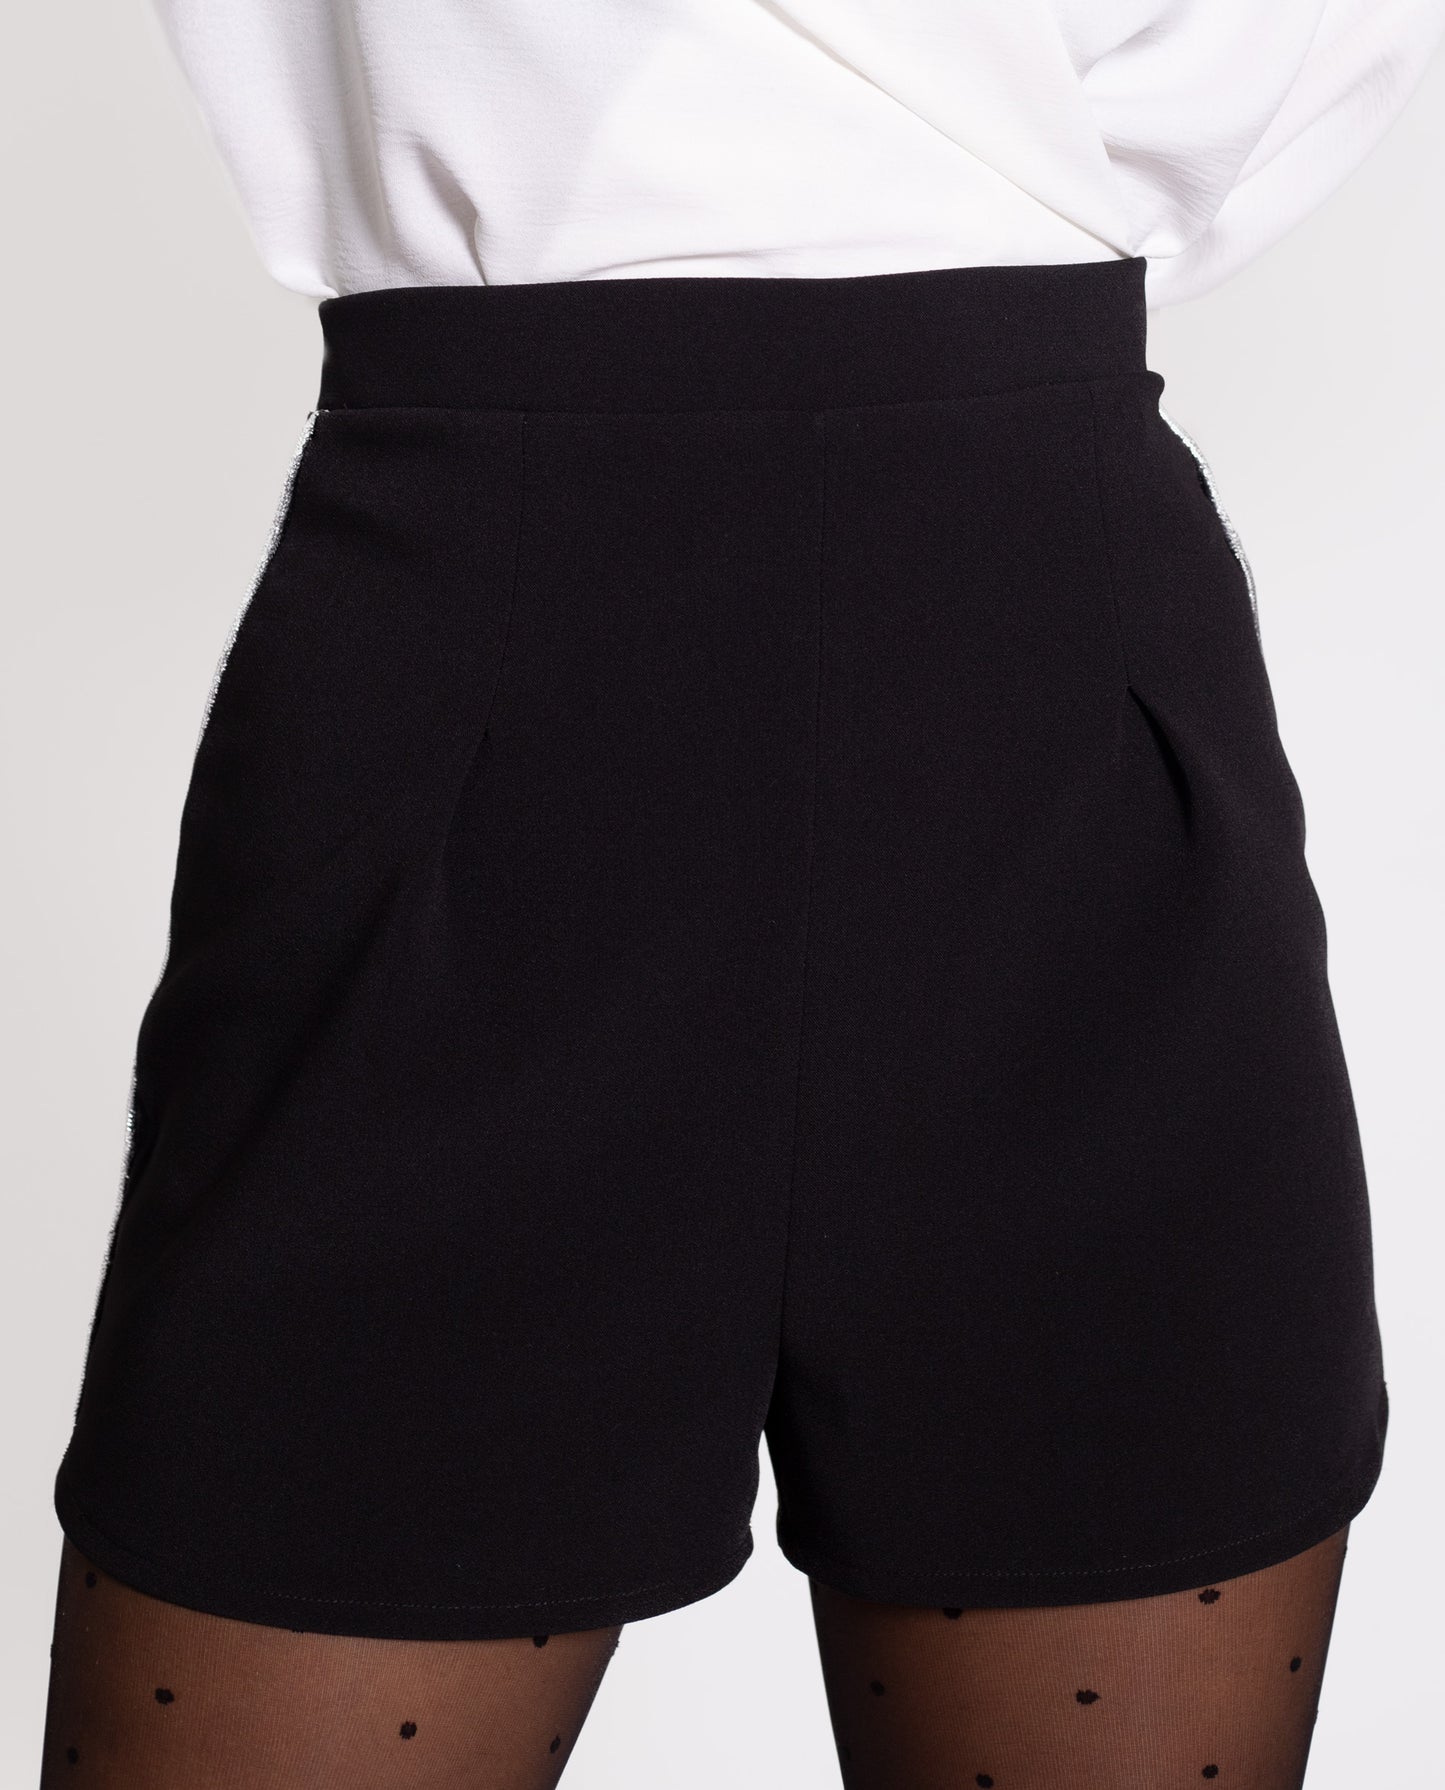 SHORT IMPERIAL | Short negro con ribete lateral plata | Shorts fiesta THE-ARE